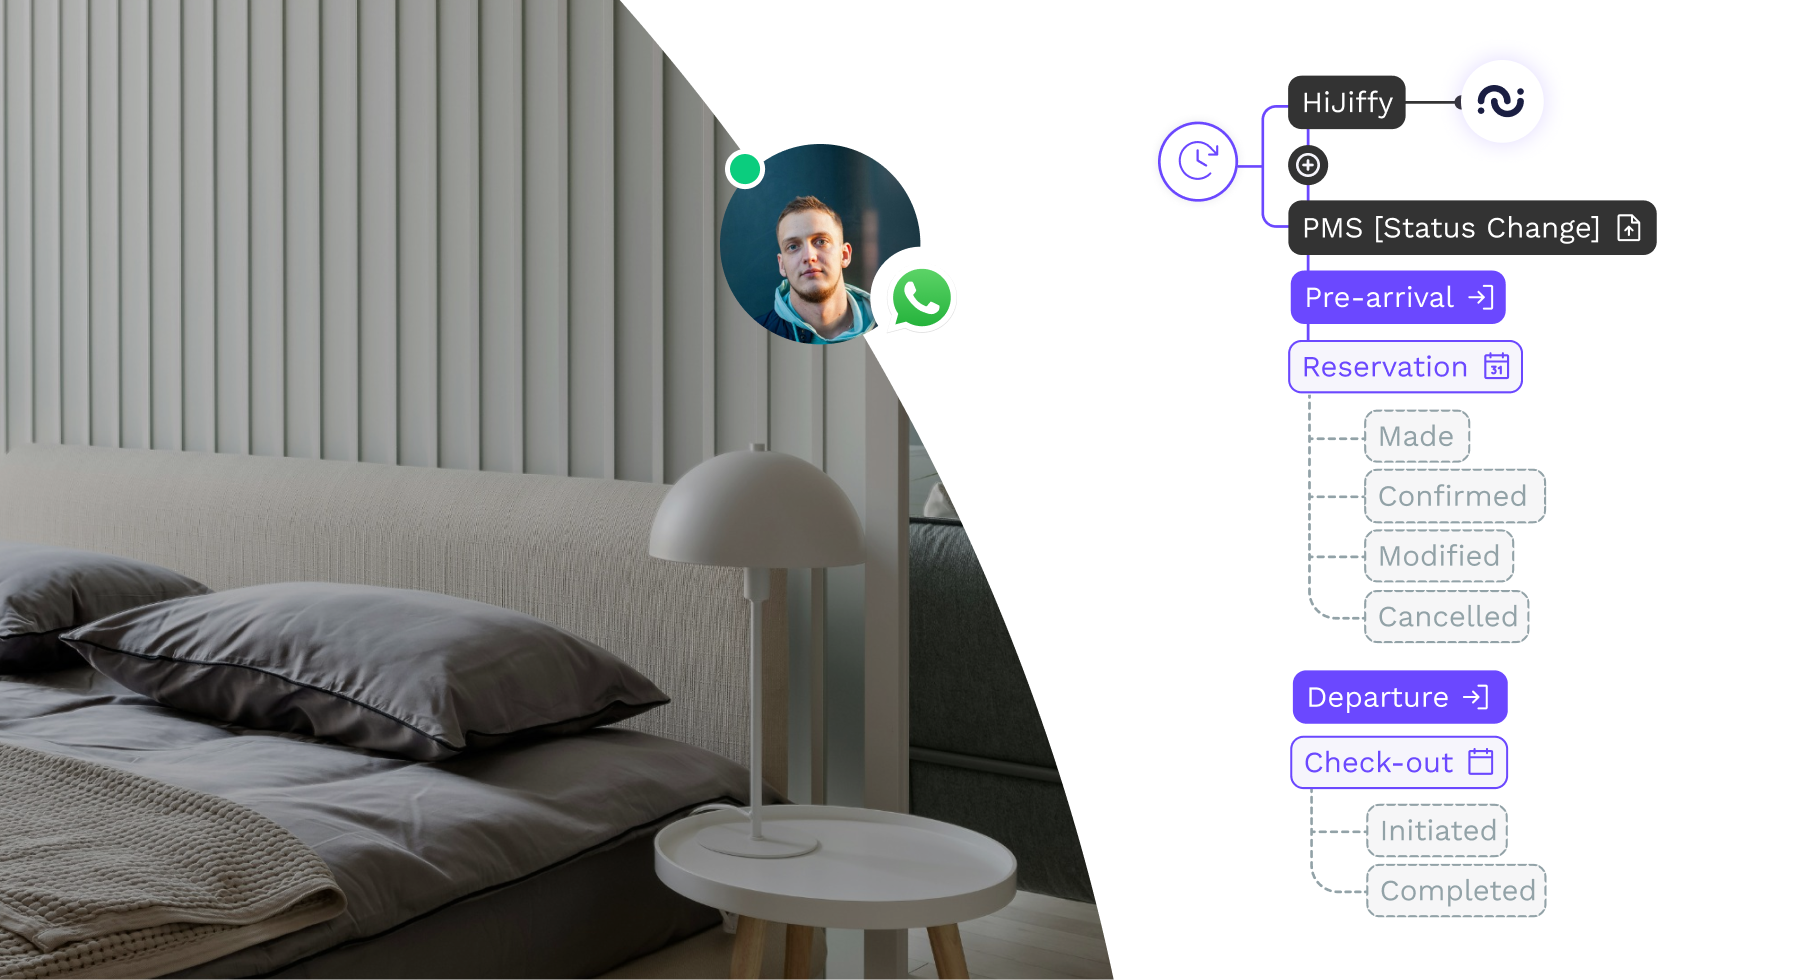 HiJiffy launches hyper-personalised guest messaging based on real-time PMS updates